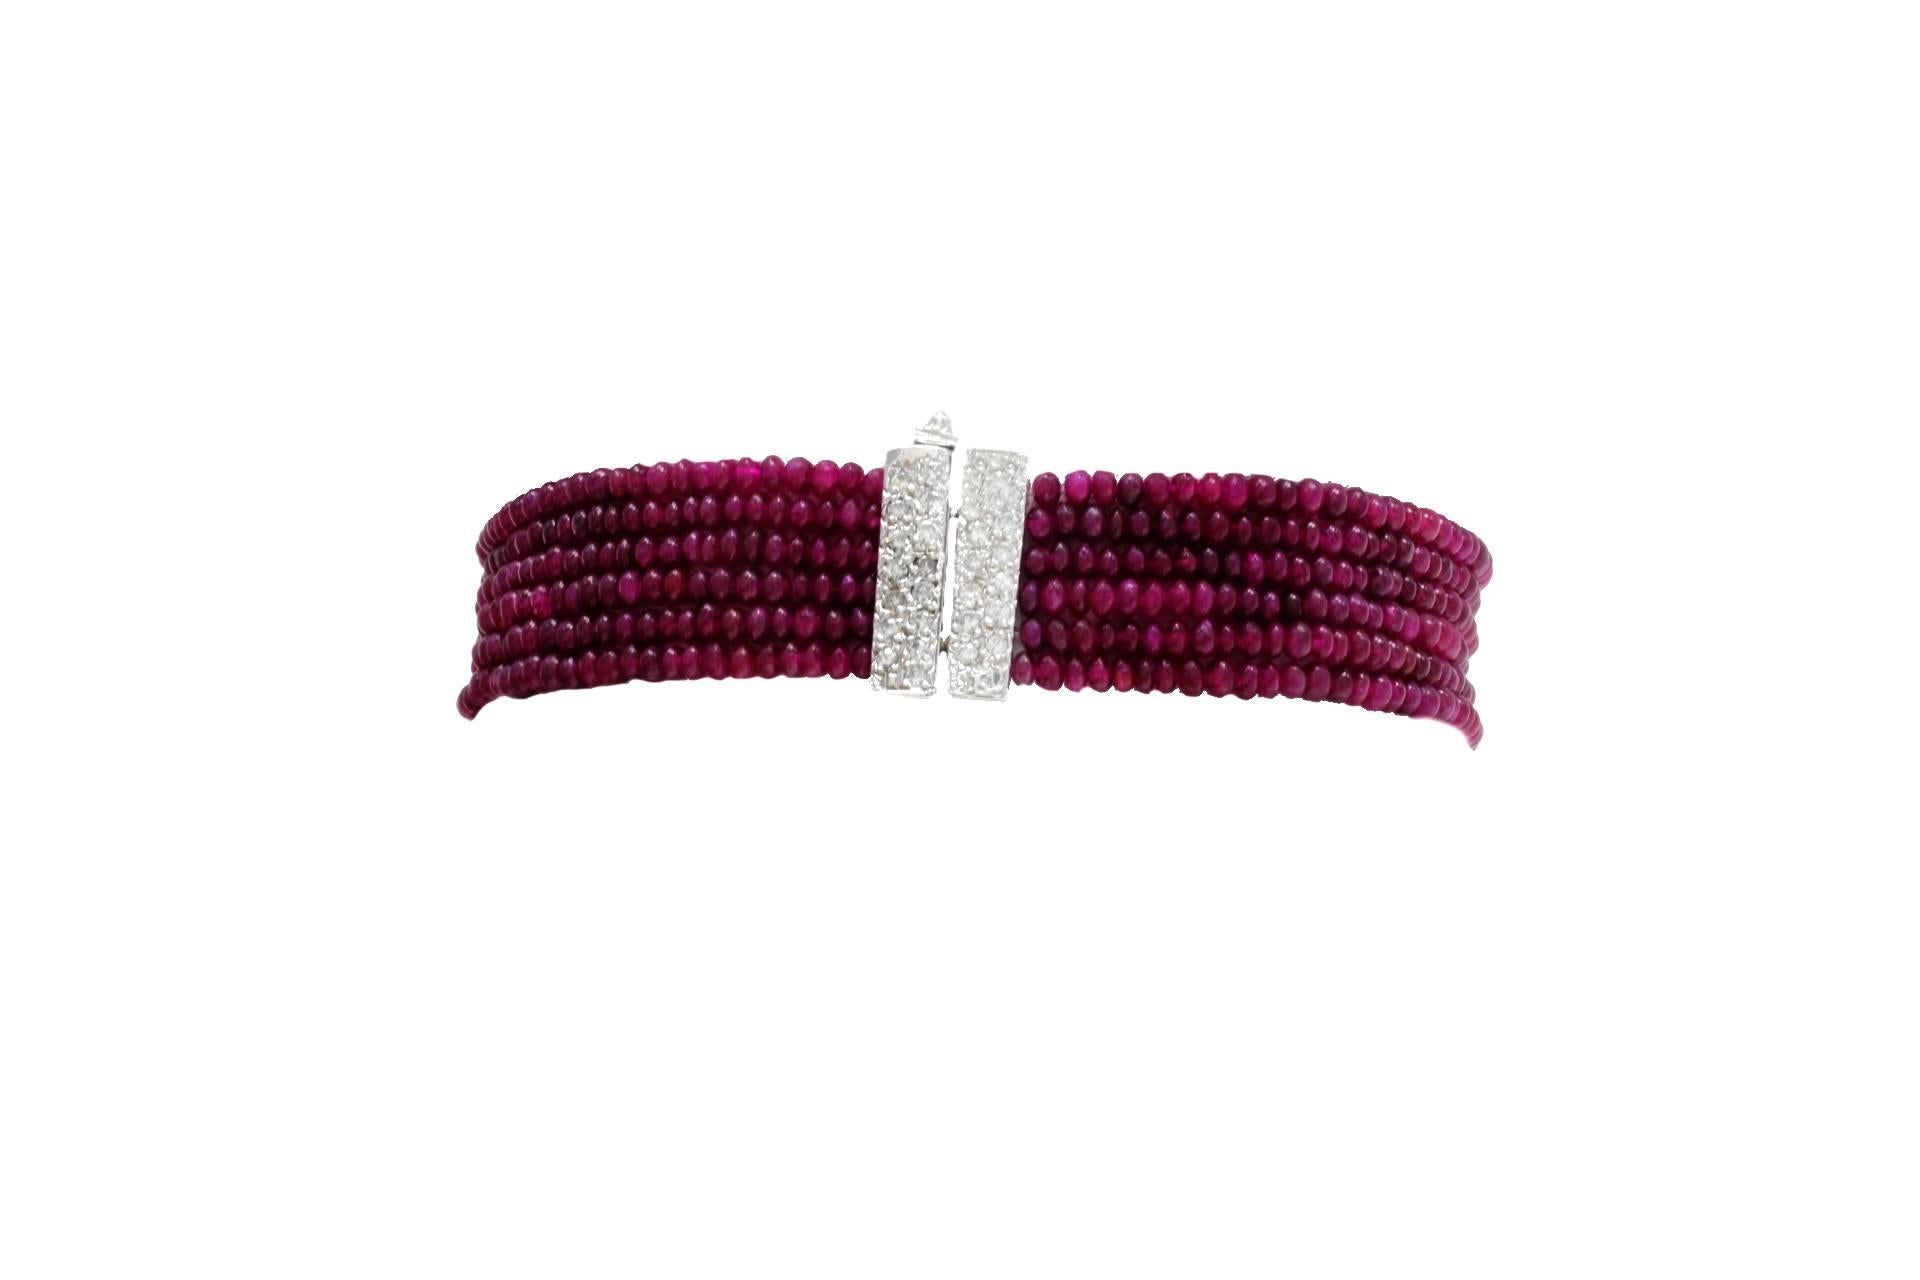 




Elegant bracelet in 14kt white gold composed of six rows of rubies divided by two diamonds stripes. The gold clasp is covered in diamonds.
diamonds 0.94kt
rubies 64.92kt
tot weight 15.5gr
r.f.  orha

For any enquires, please contact the seller